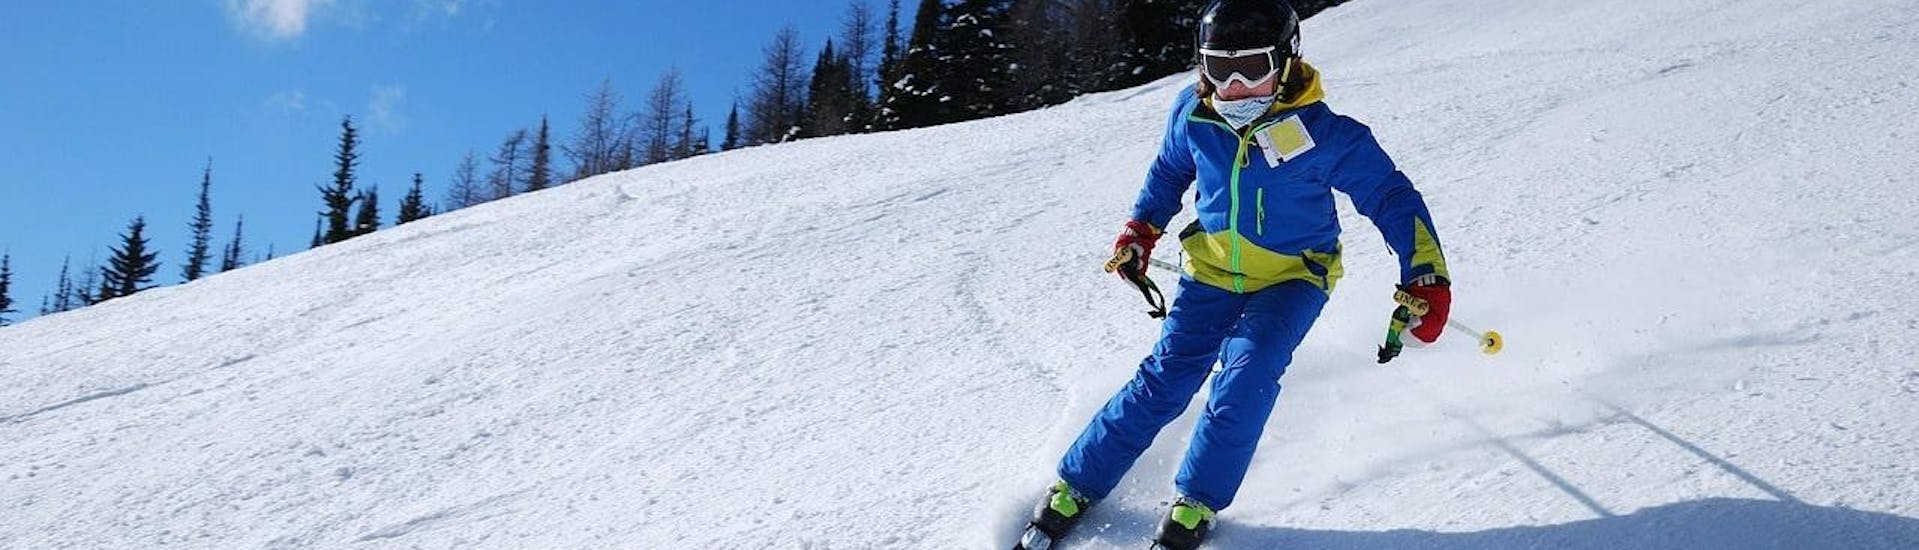 private-ski-lessons-for-kids-4-7-years-first-timer-moonshot-hero